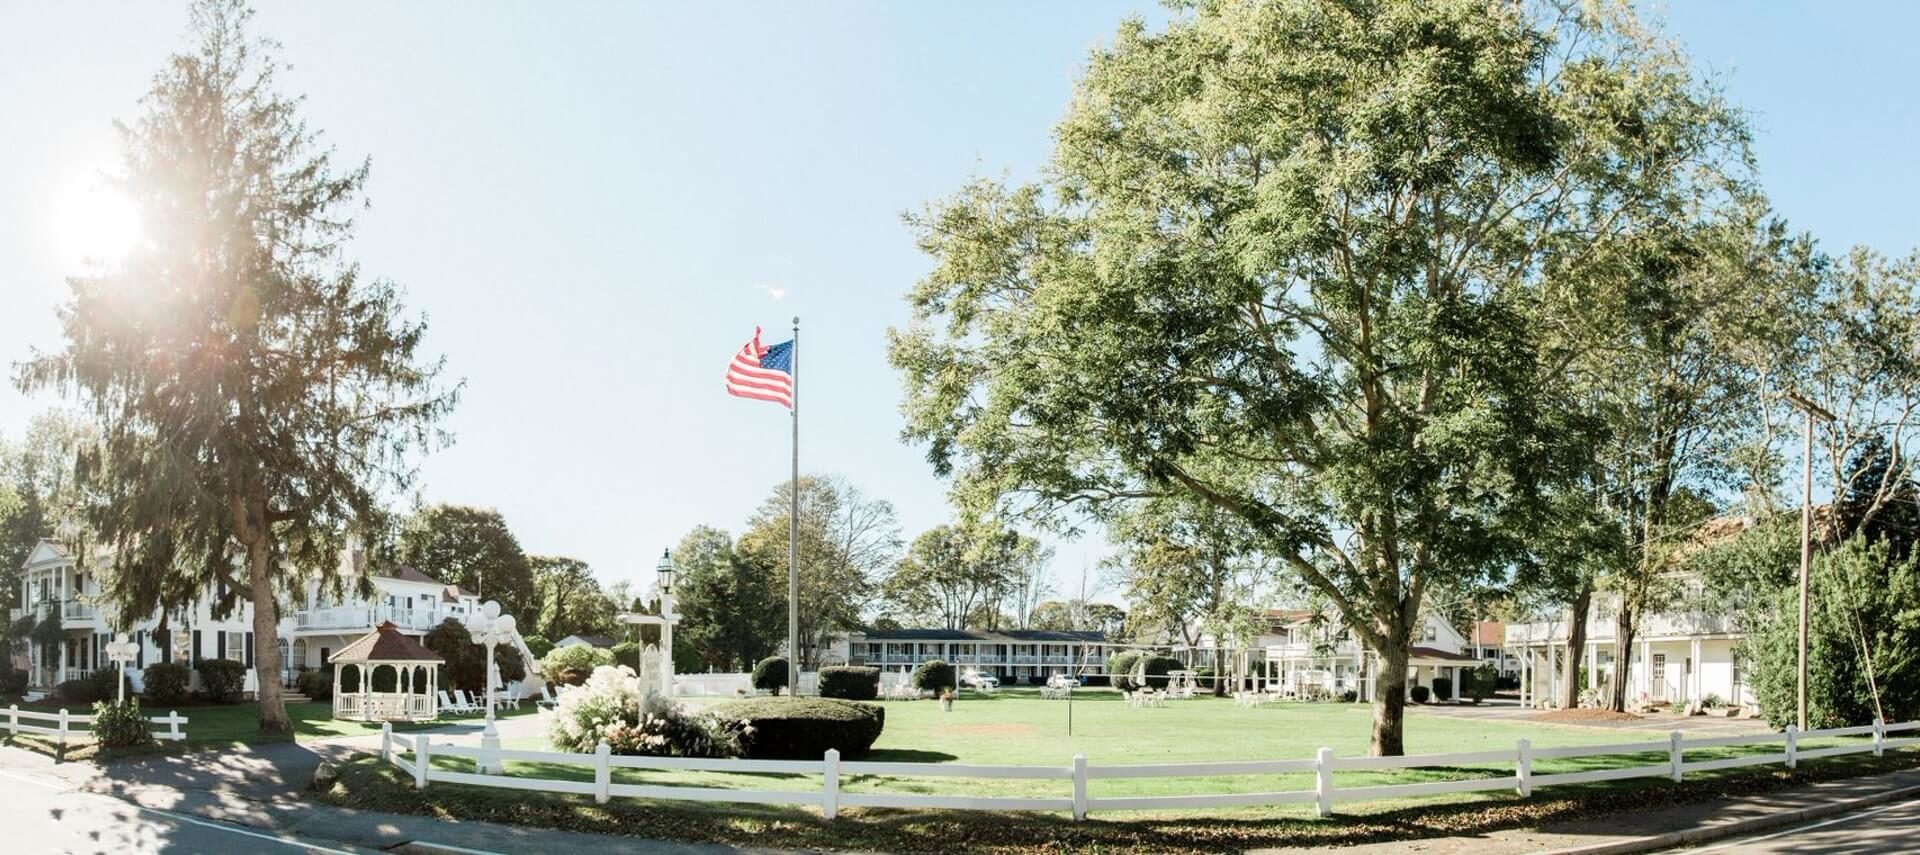 Panoramic view of hotel grounds with several buildings, large grassy area, trees and center flag pole with American flag